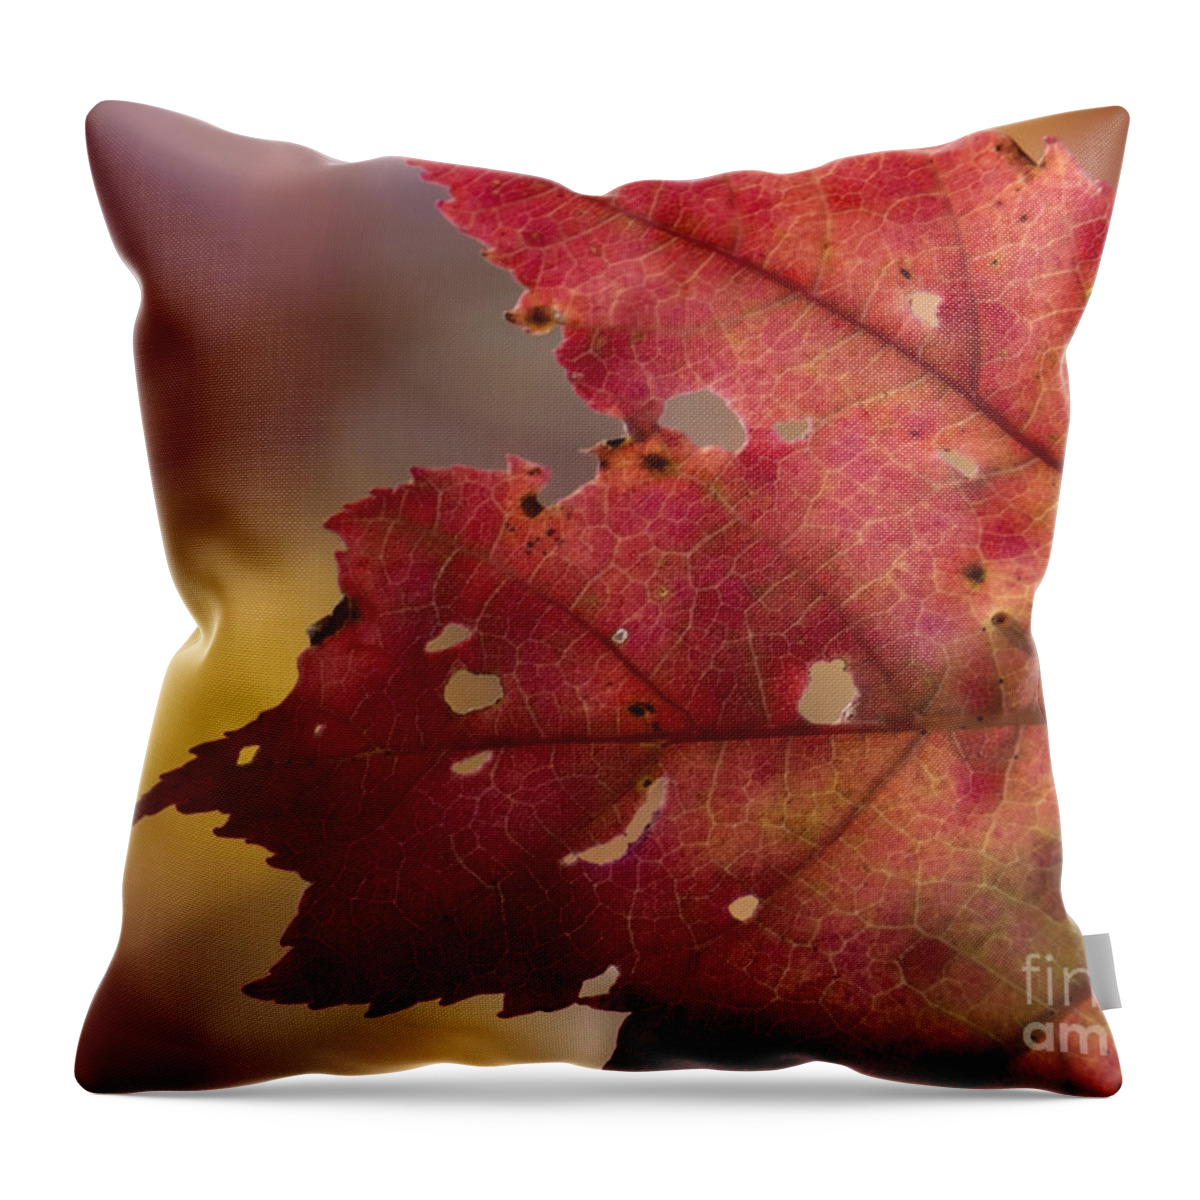 Autumn Leaves Throw Pillow featuring the photograph Red Leaf by Lili Feinstein